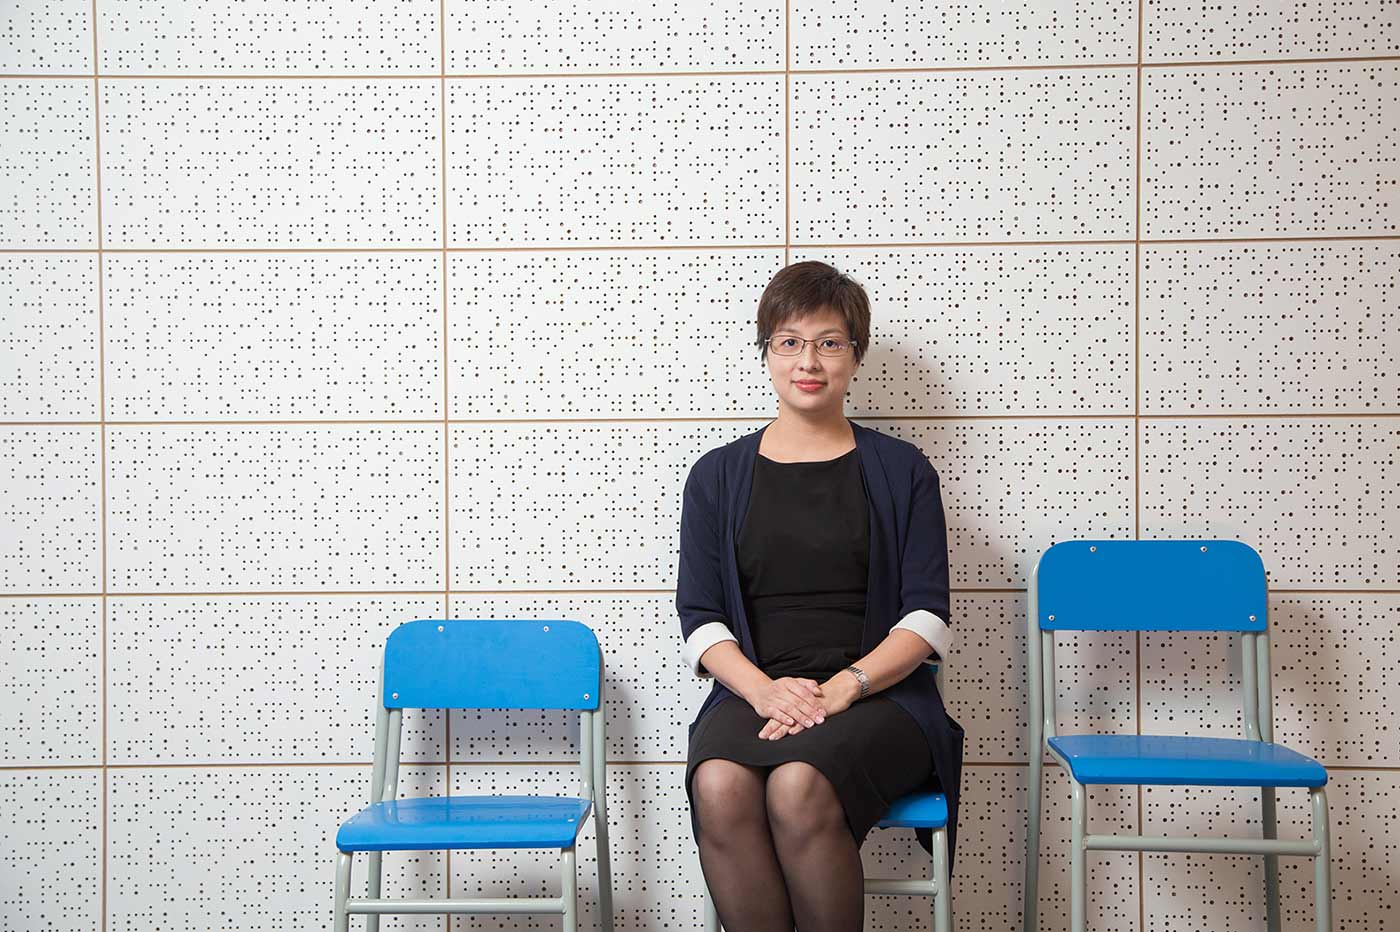 Irene: ‘It’s not hard to set up a school; it’s harder to run it well.’ <em>(Photo by Keith Hiro)</em>